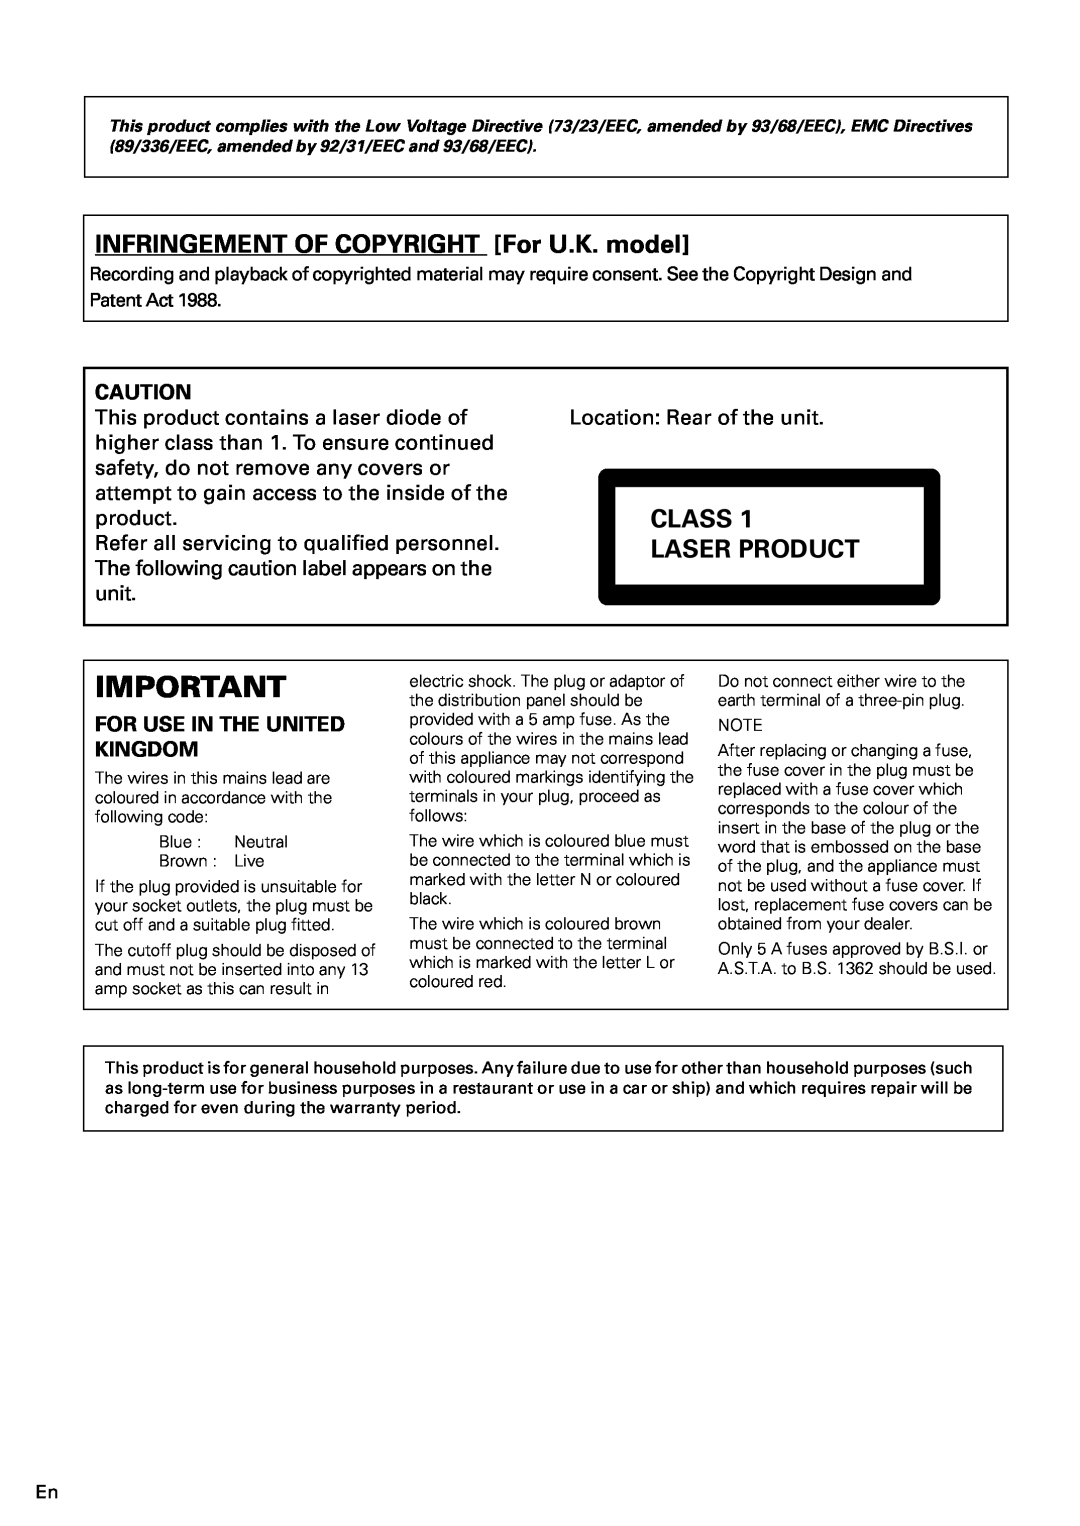 Pioneer PDR-W839 manual INFRINGEMENT OF COPYRIGHTFor U.K. model, Class Laser Product, For Use In The United, Kingdom 